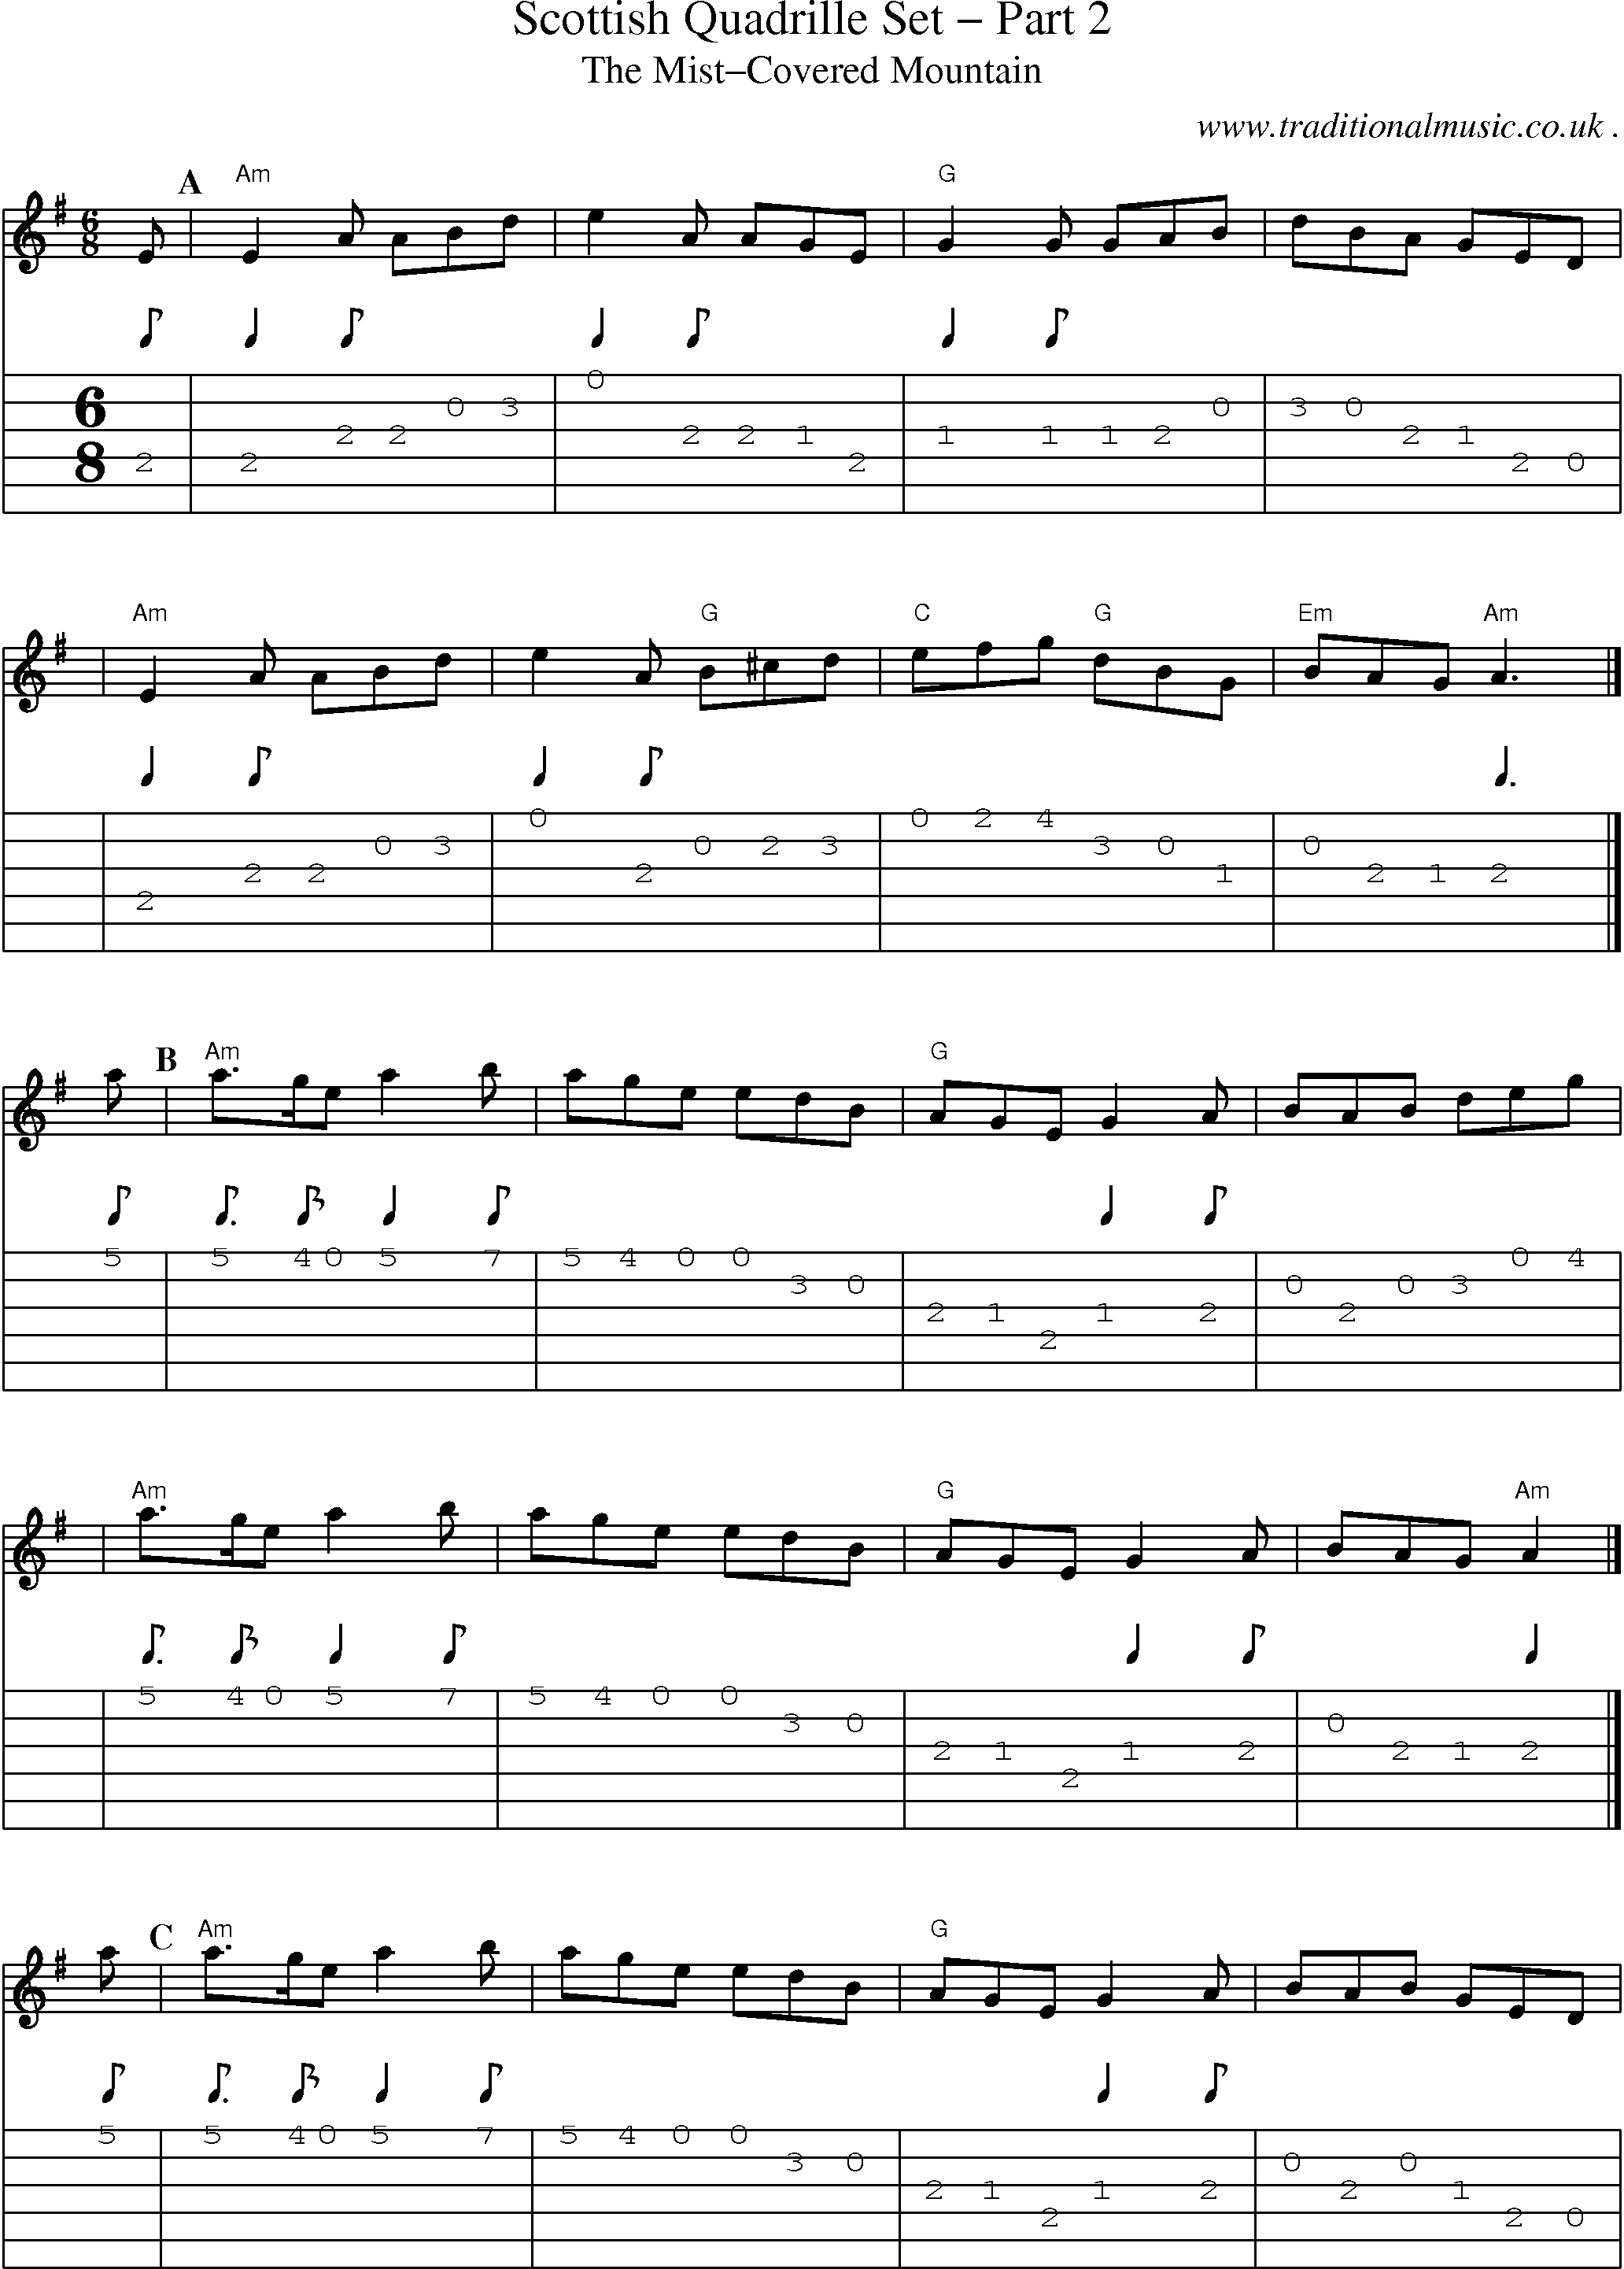 Sheet-music  score, Chords and Guitar Tabs for Scottish Quadrille Set Part 2